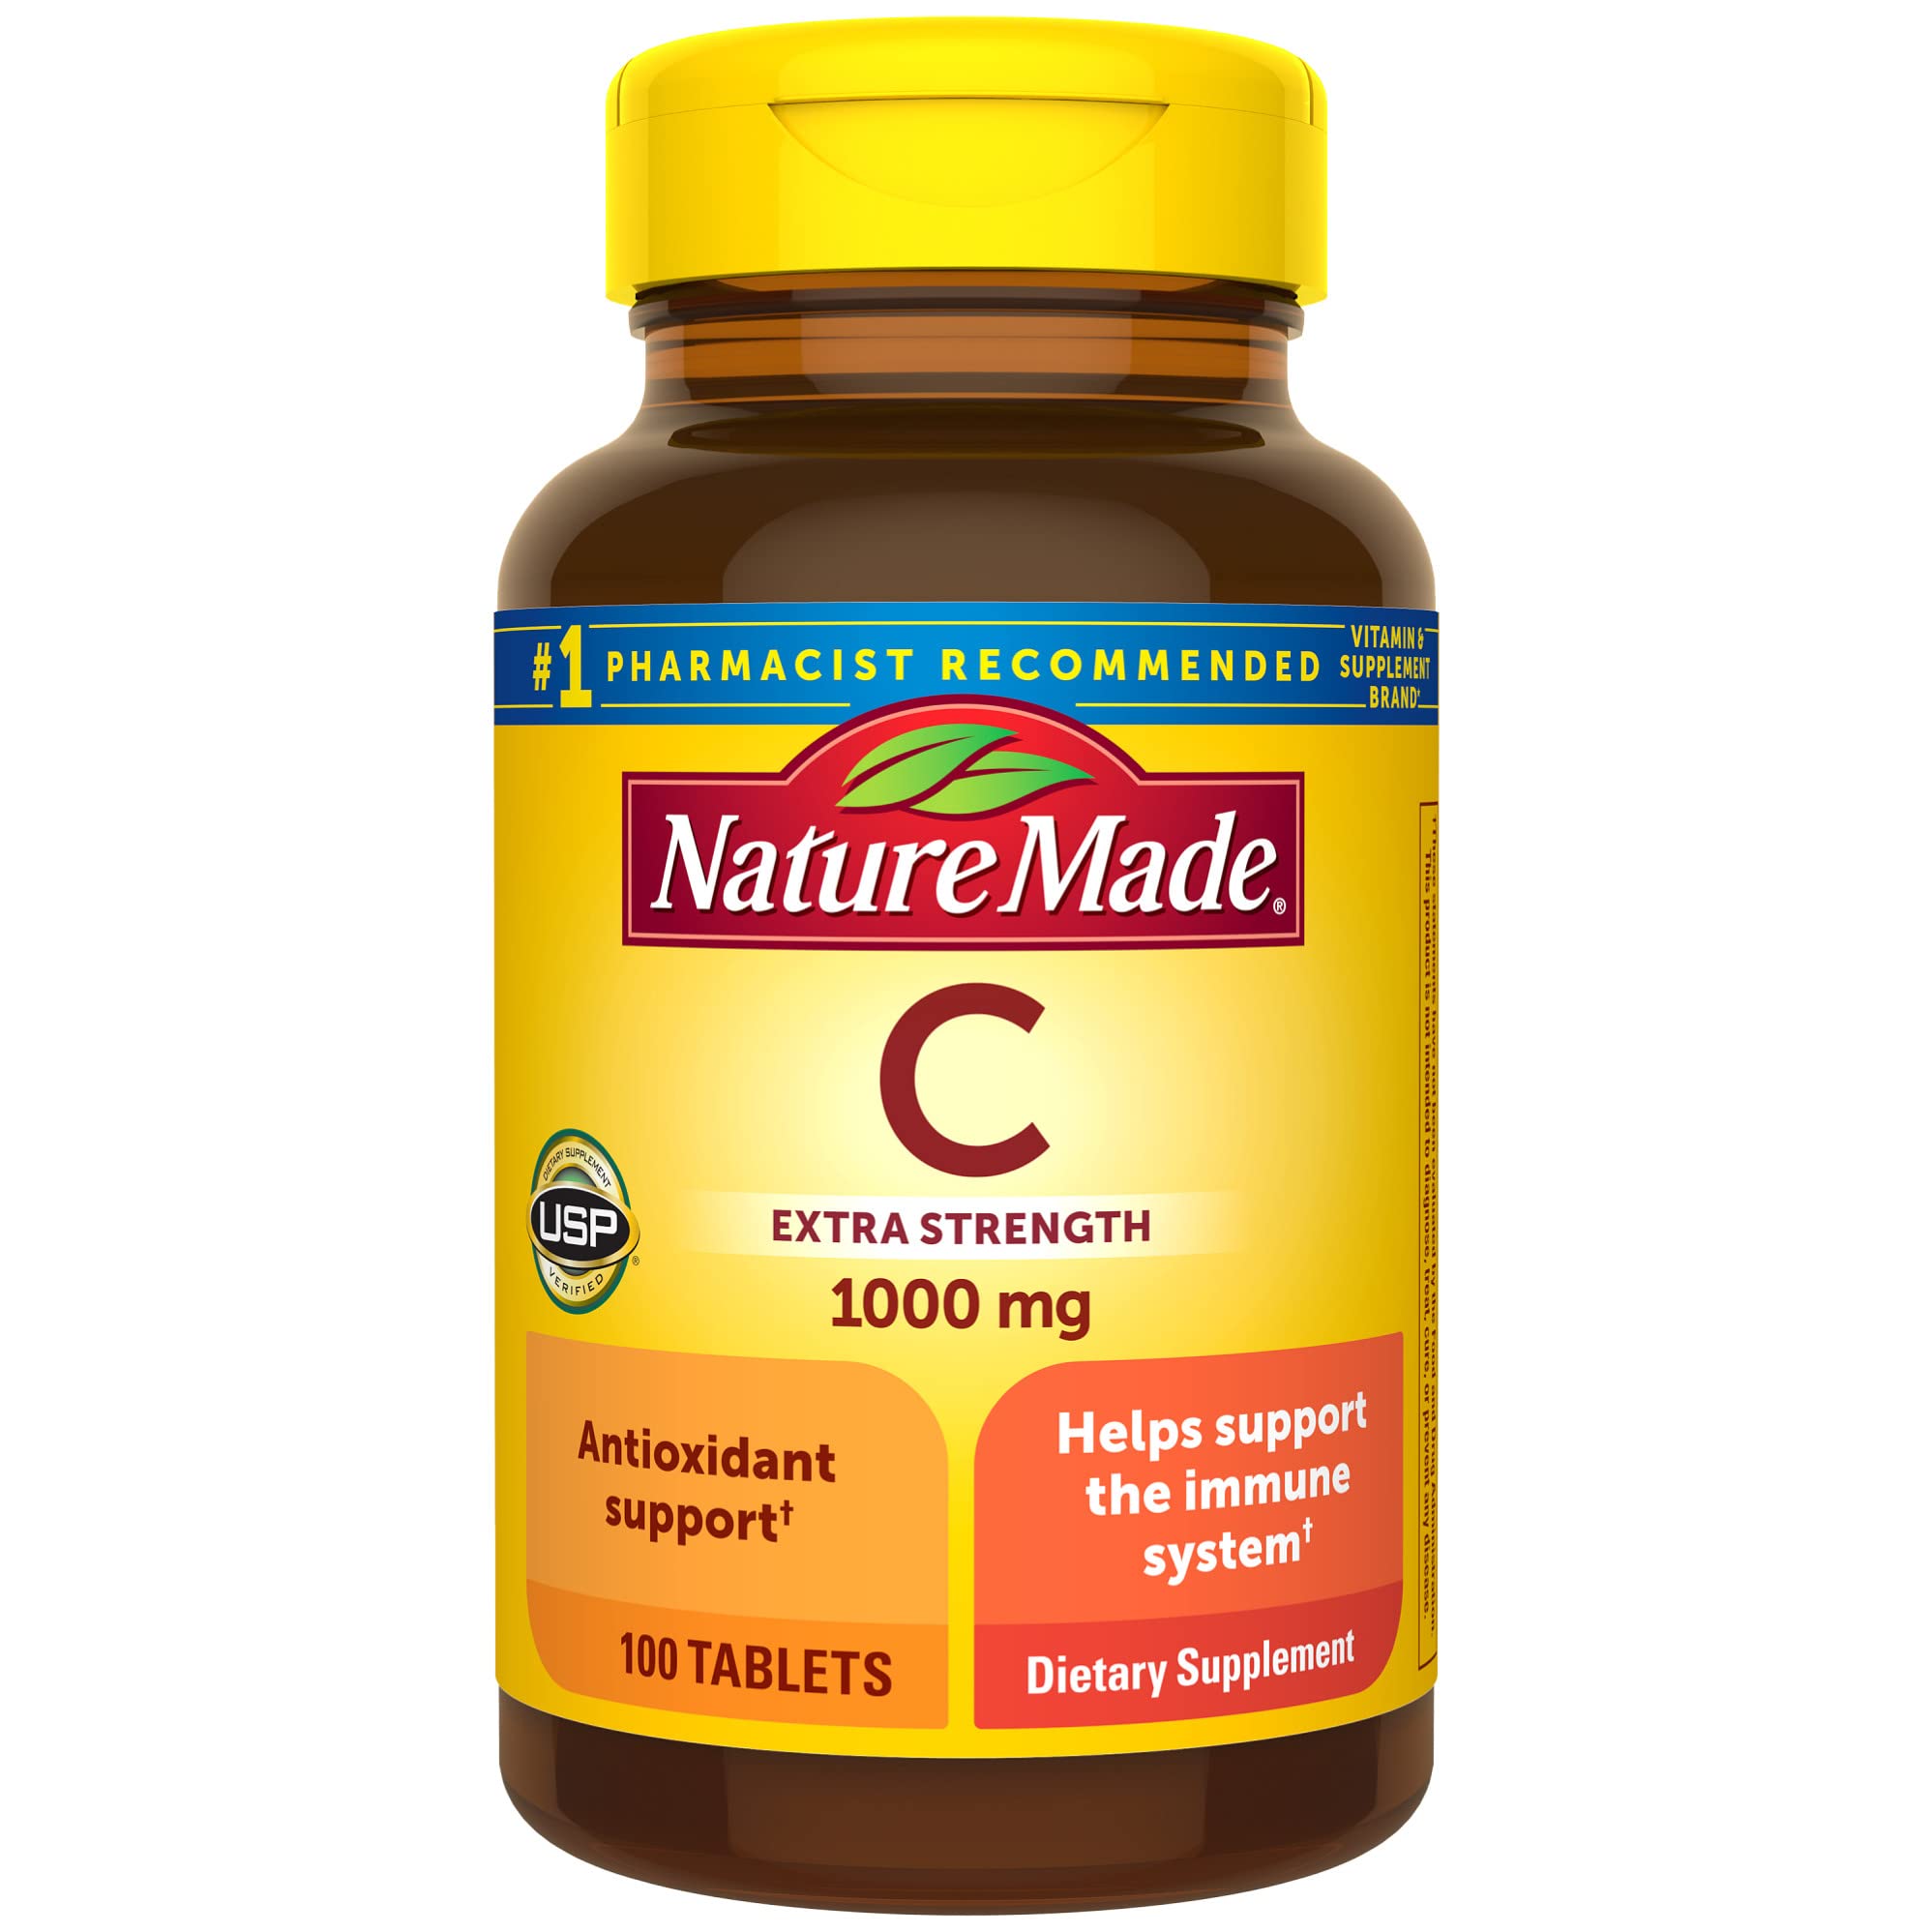 Nature Made Extra Strength Vitamin C 1000 mg, Dietary Supplement for Immune Support, 100 Tablets, 100 Day Supply